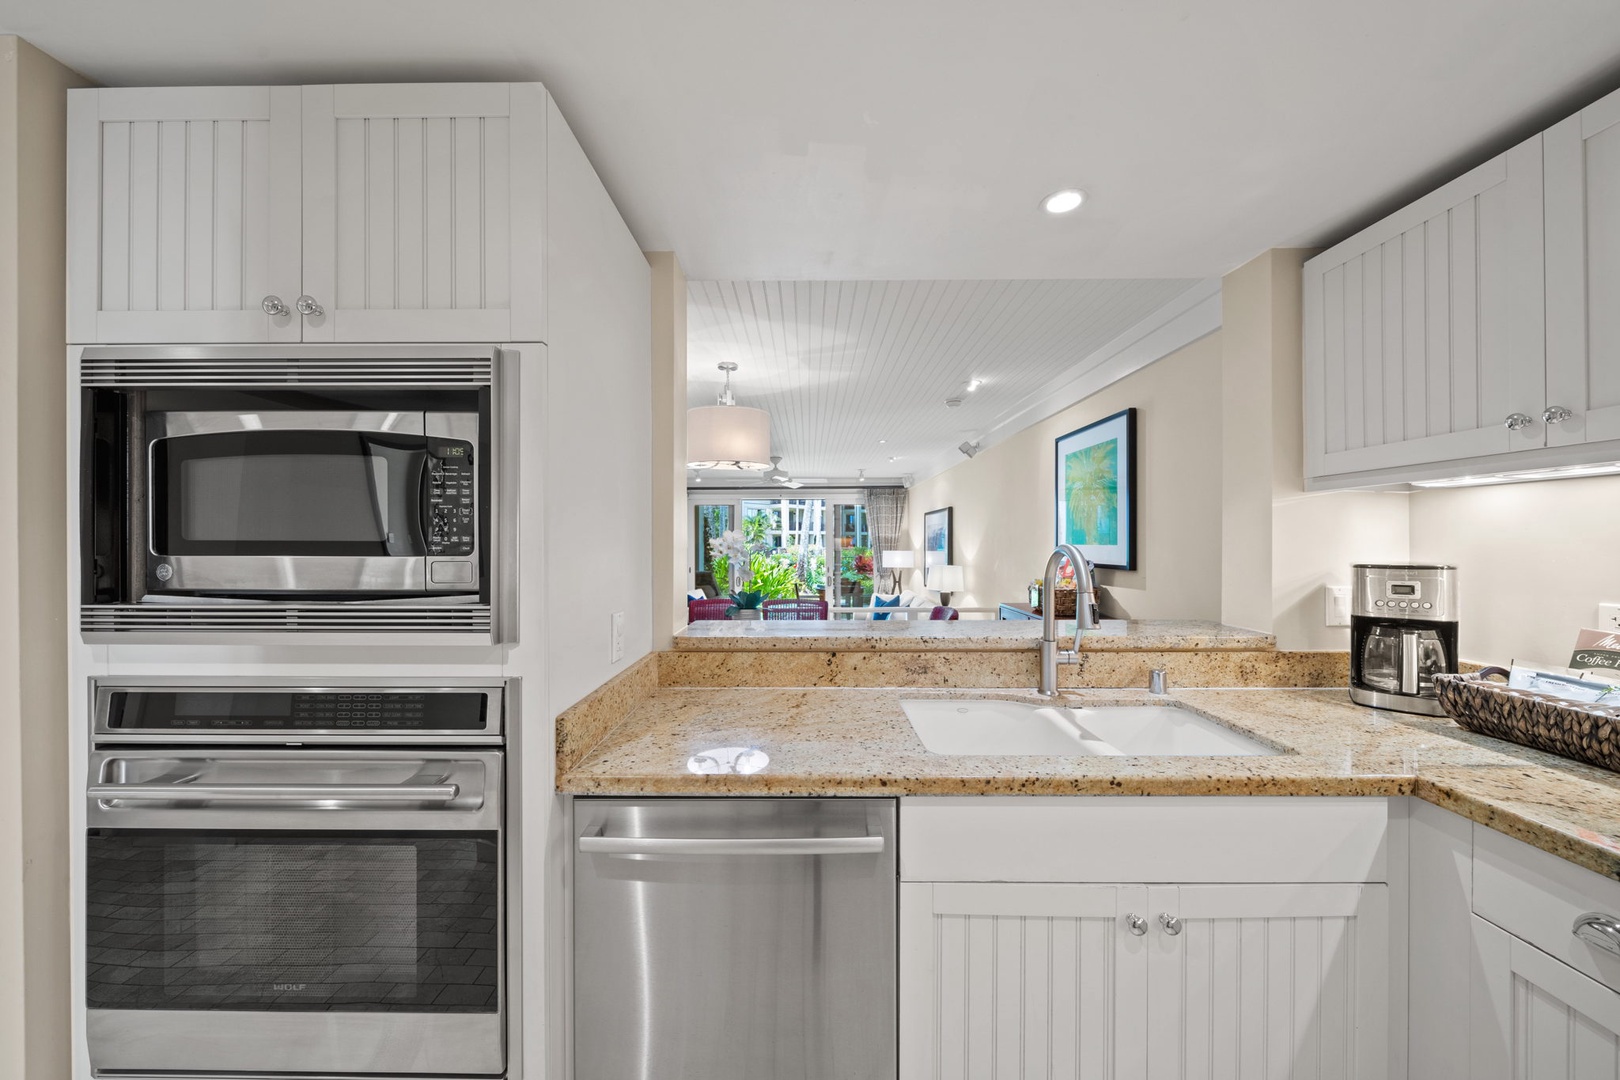 Kahuku Vacation Rentals, Turtle Bay Villas 114 - The kitchen overlooks the dining and living areas with peekaboo garden views